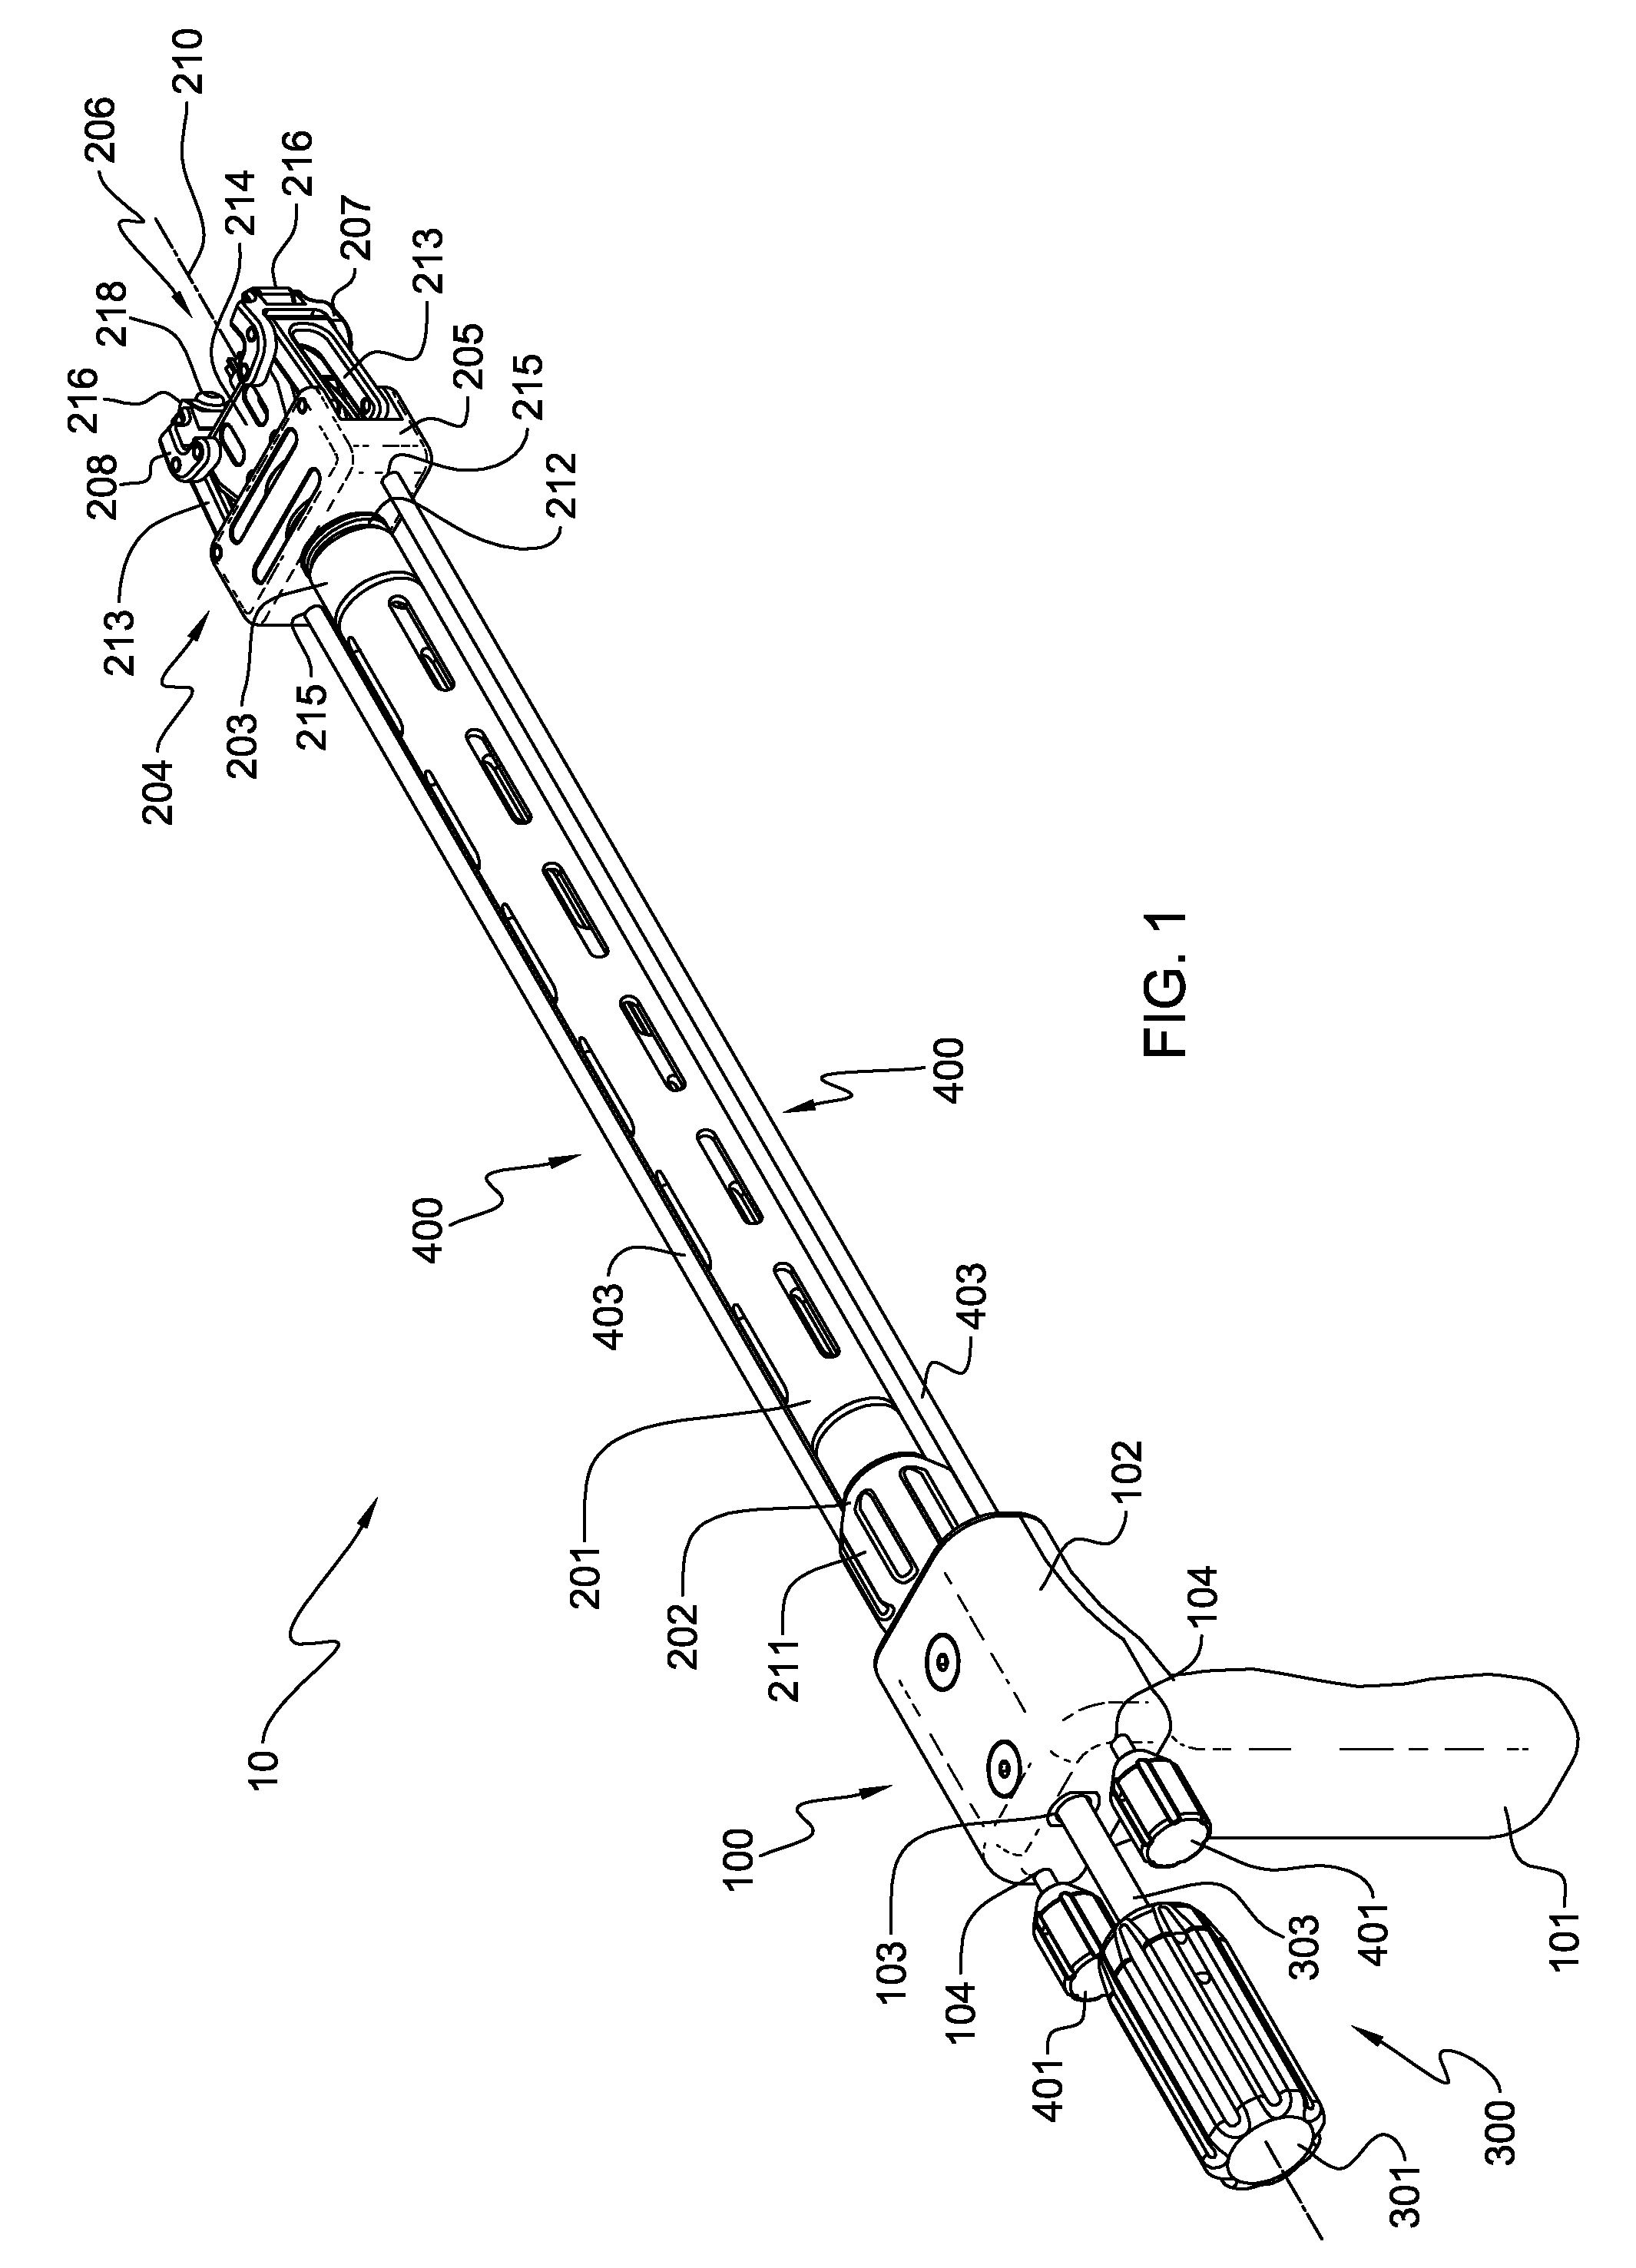 Surgical instrument and method of use for inserting an implant between two bones